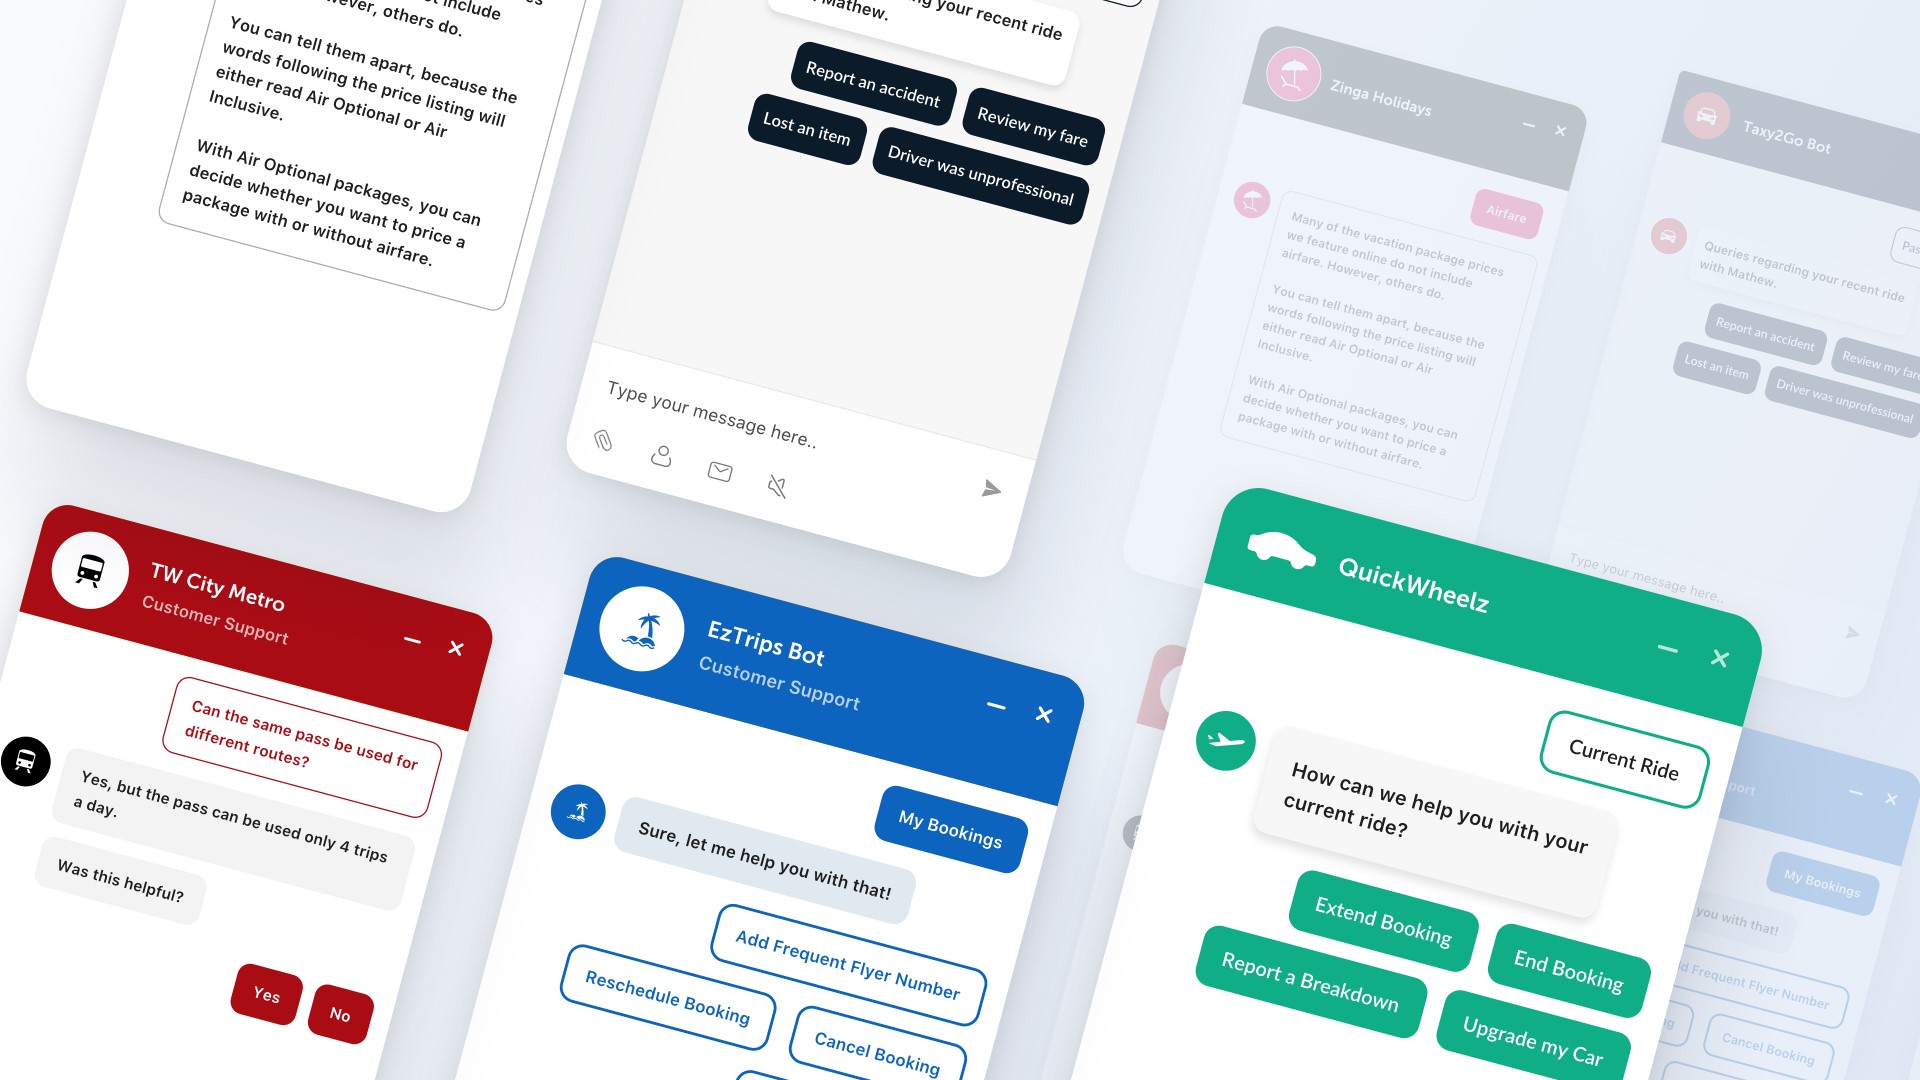 interactive user interface of a chatbot